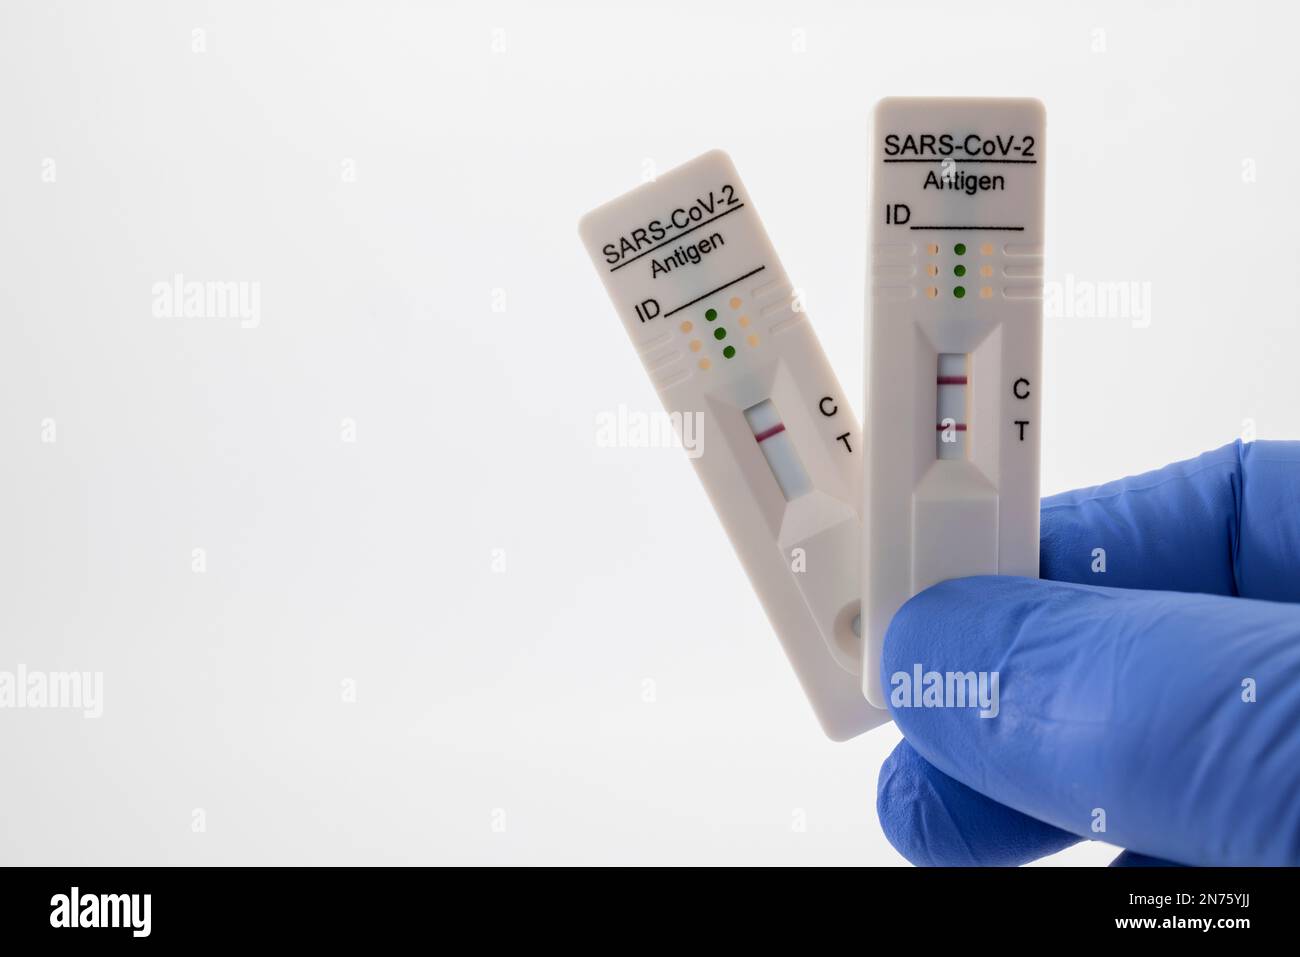 Male hand wearing disposable blue medical glove holding two Rapid SARS-CoV-2 antigen test cassettes with one positive and one negative test result, white background, Stock Photo